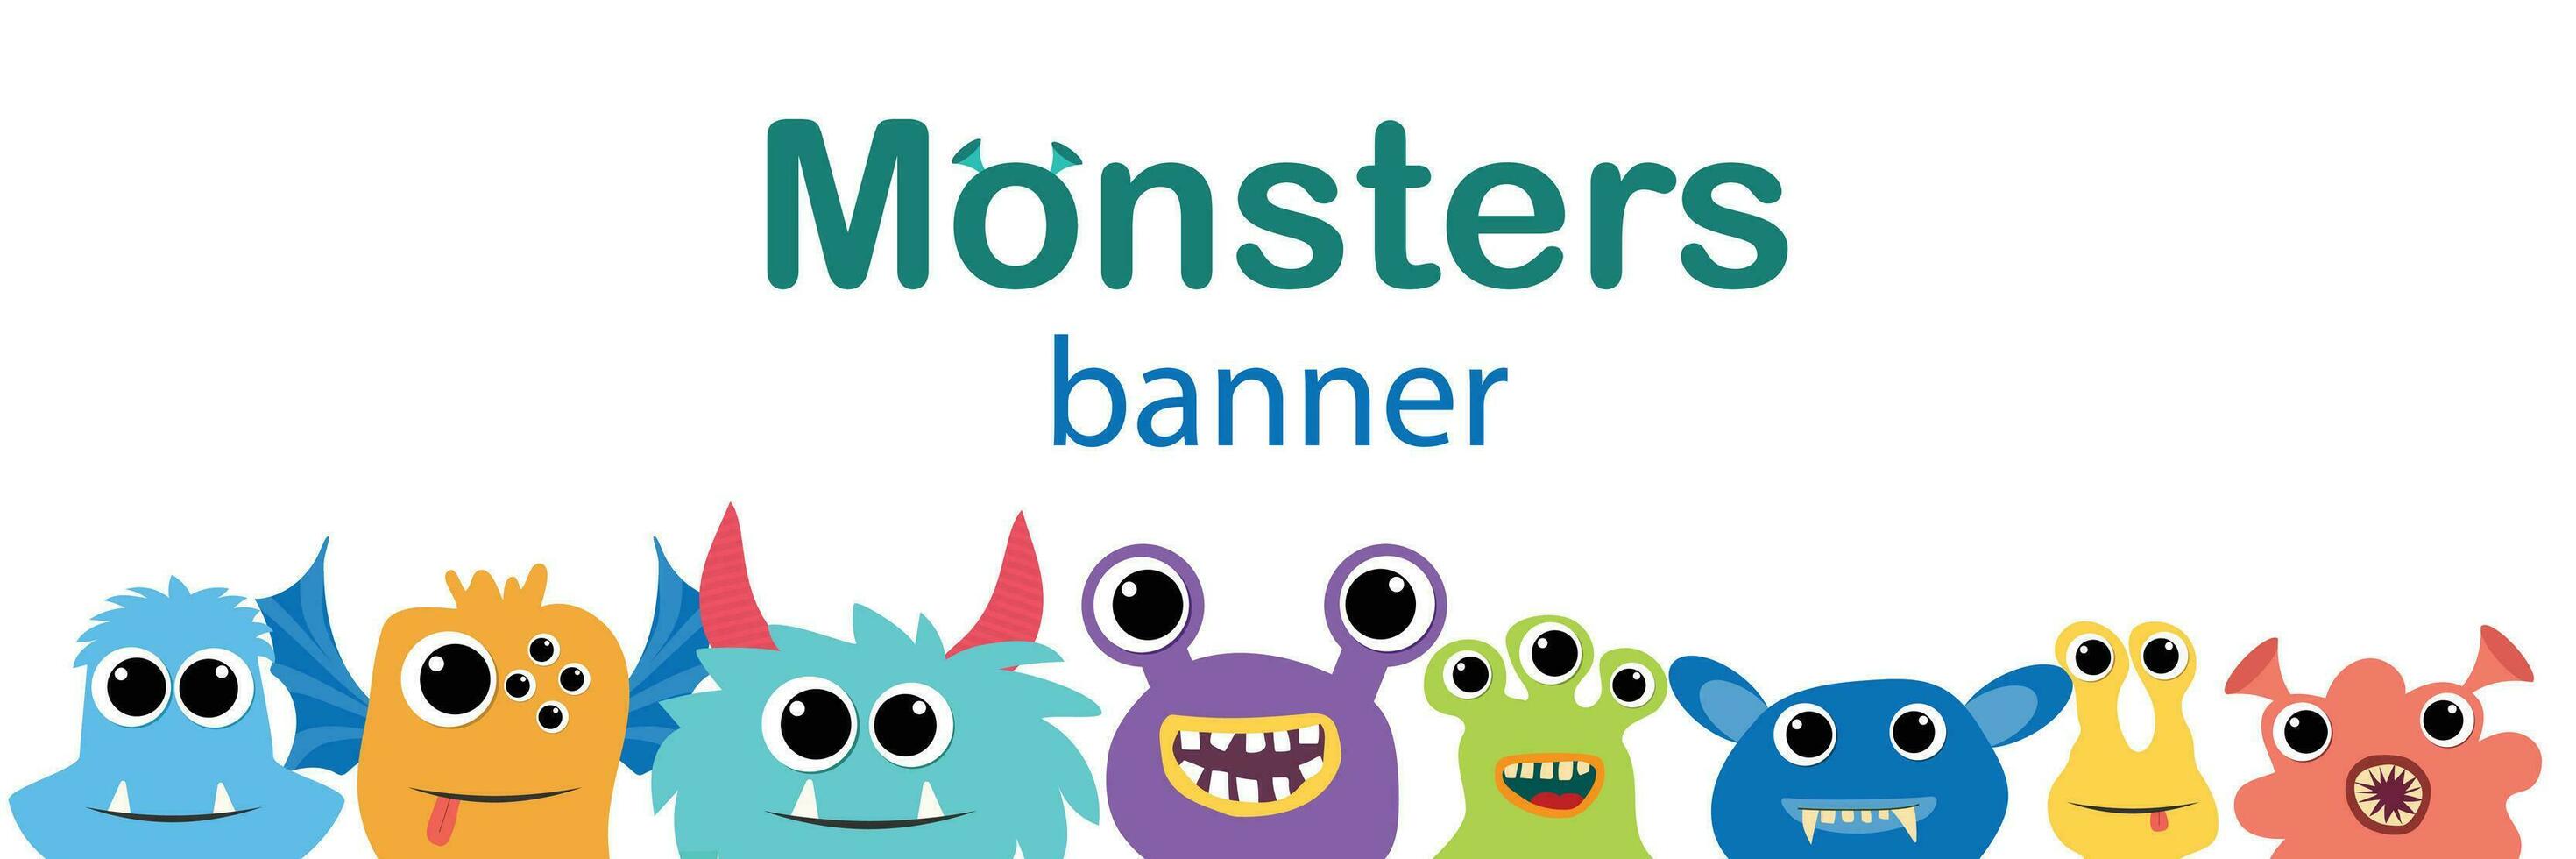 Monster banner. Hand drawn graphic for typography poster, card, label, flyer, page, banner, baby wear, nursery. Vector illustration.